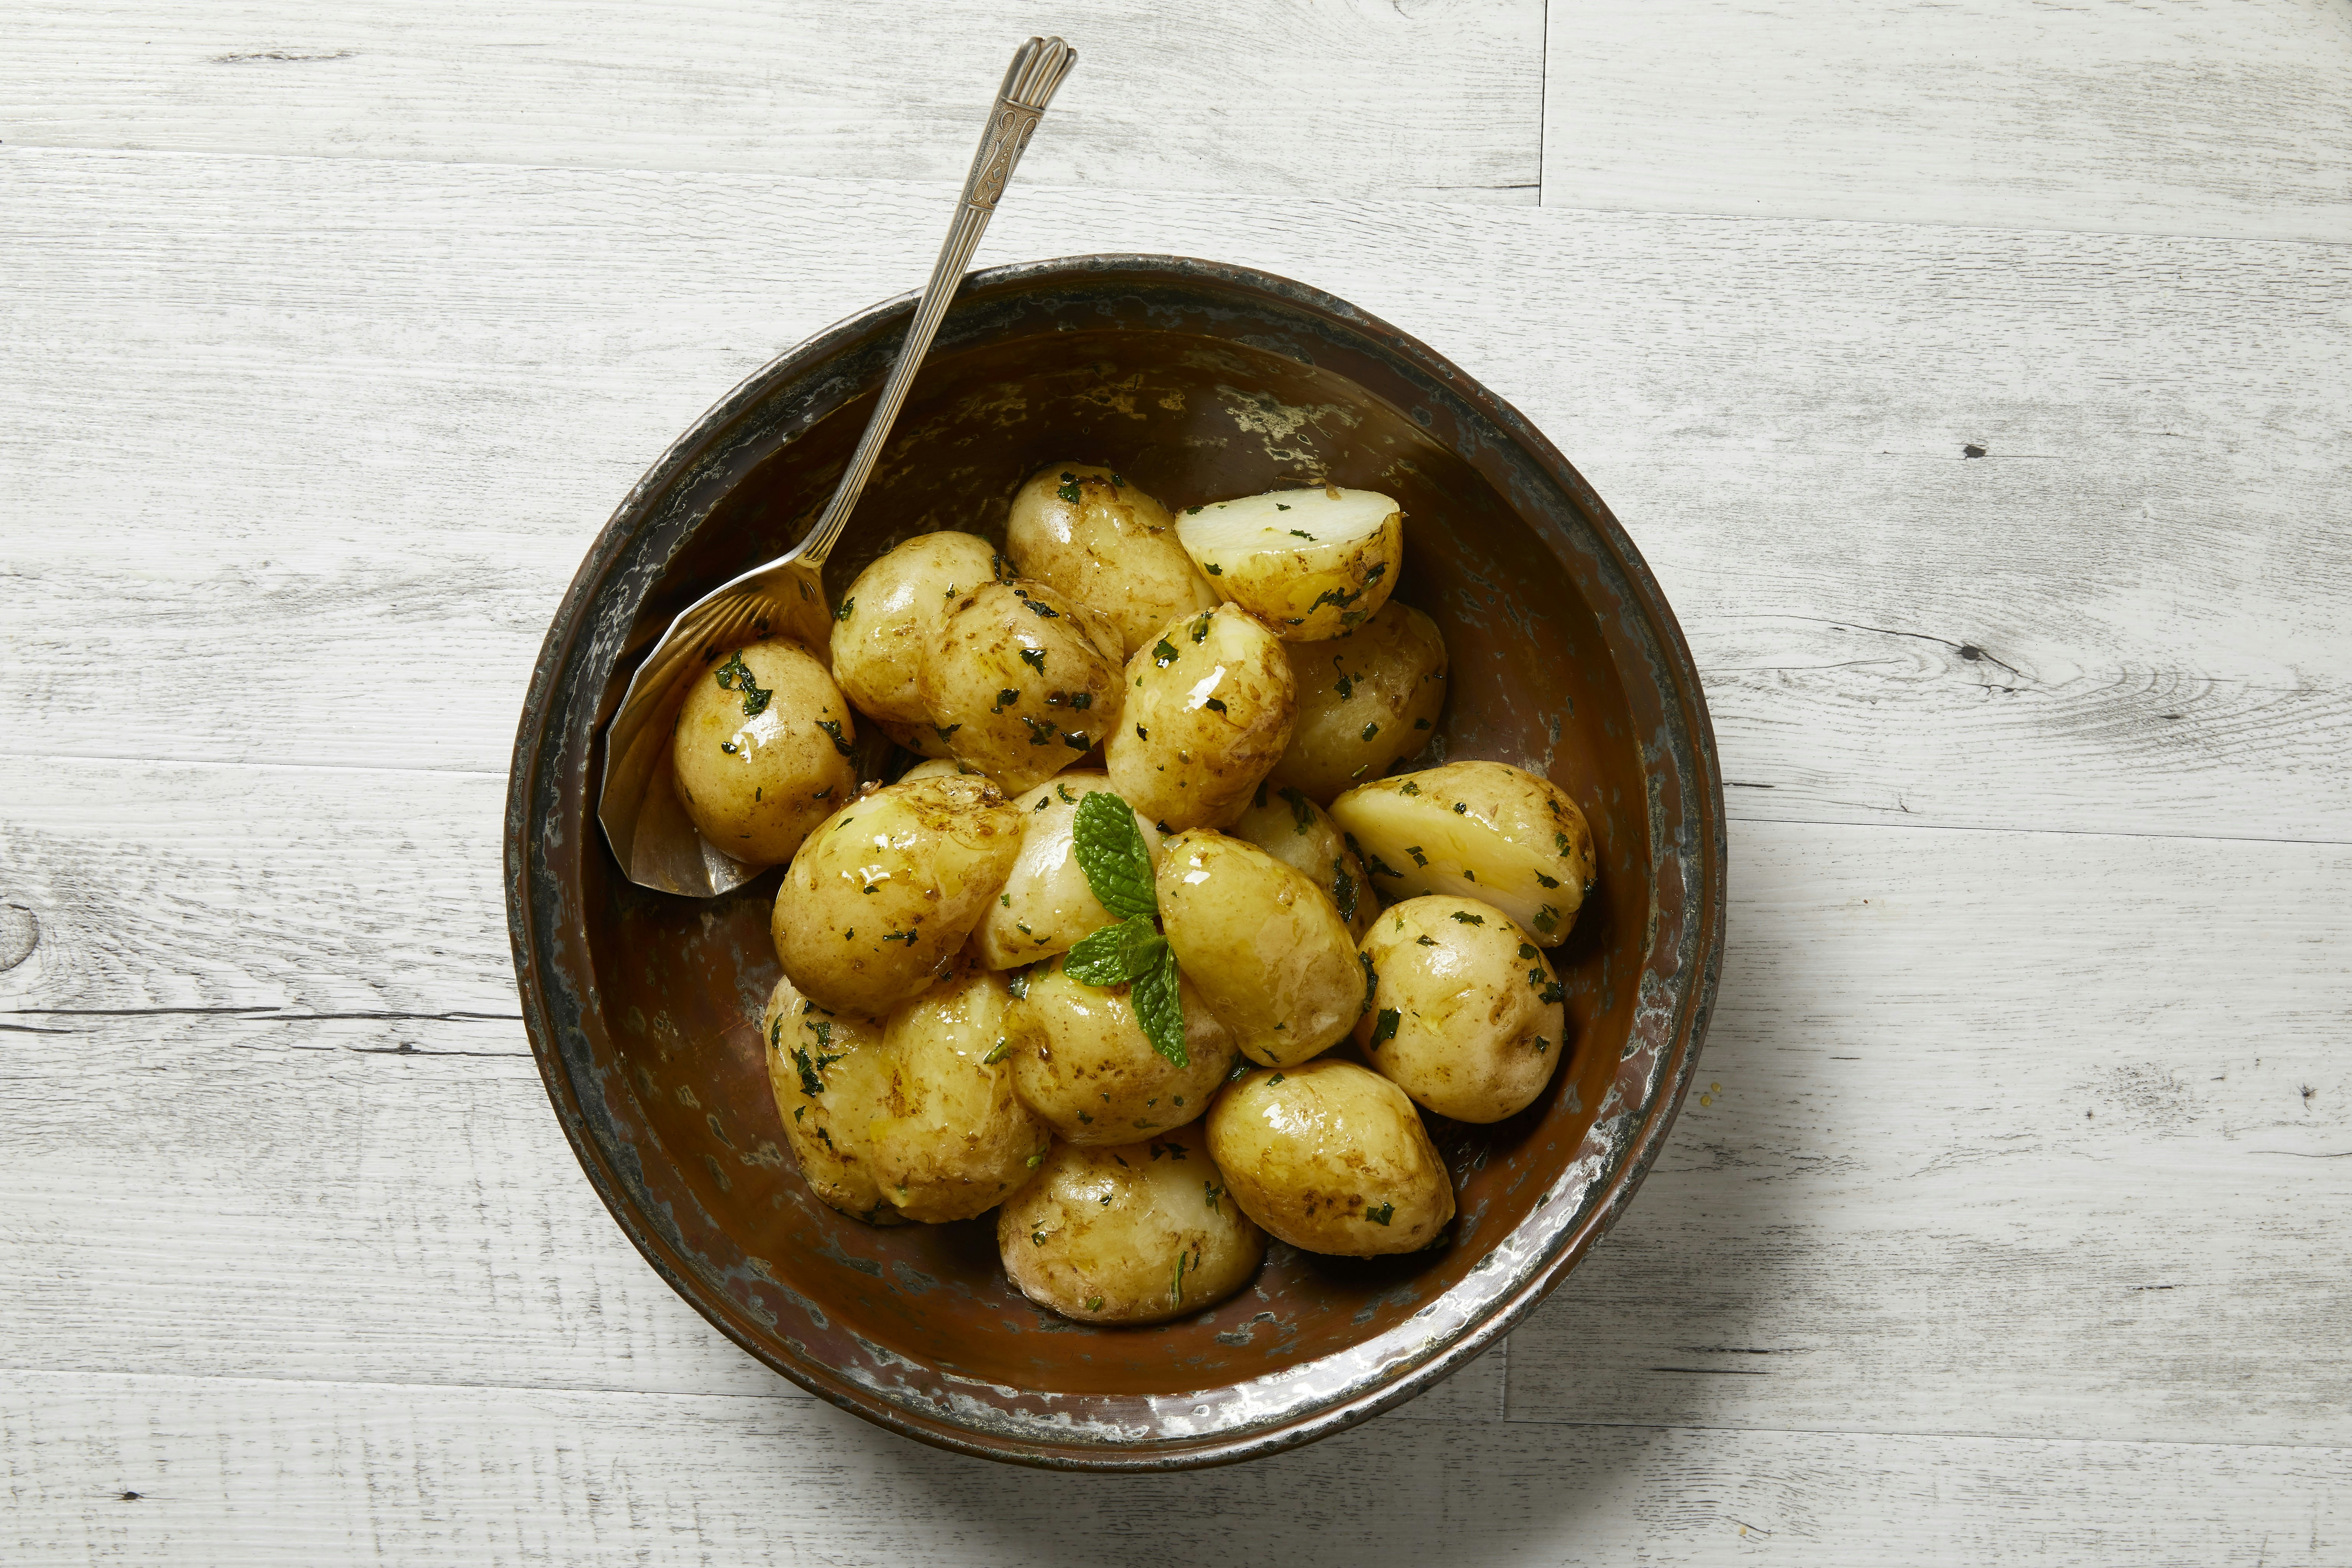 https://freshchoice.imgix.net/assets/recipes/Boiled-New-Potatoes-with-Minty-Herb-Butter.jpg